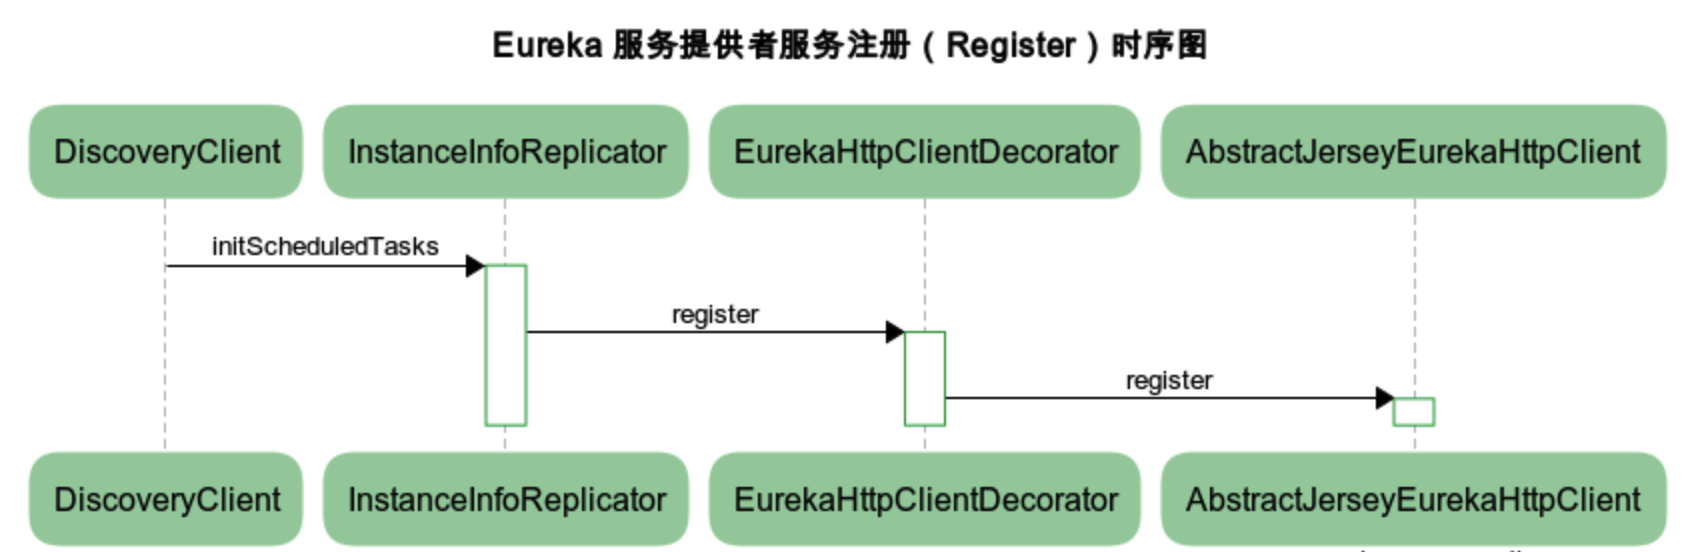 docs/micro-services/images/eureka-service-provider-register-sequence-chart.png